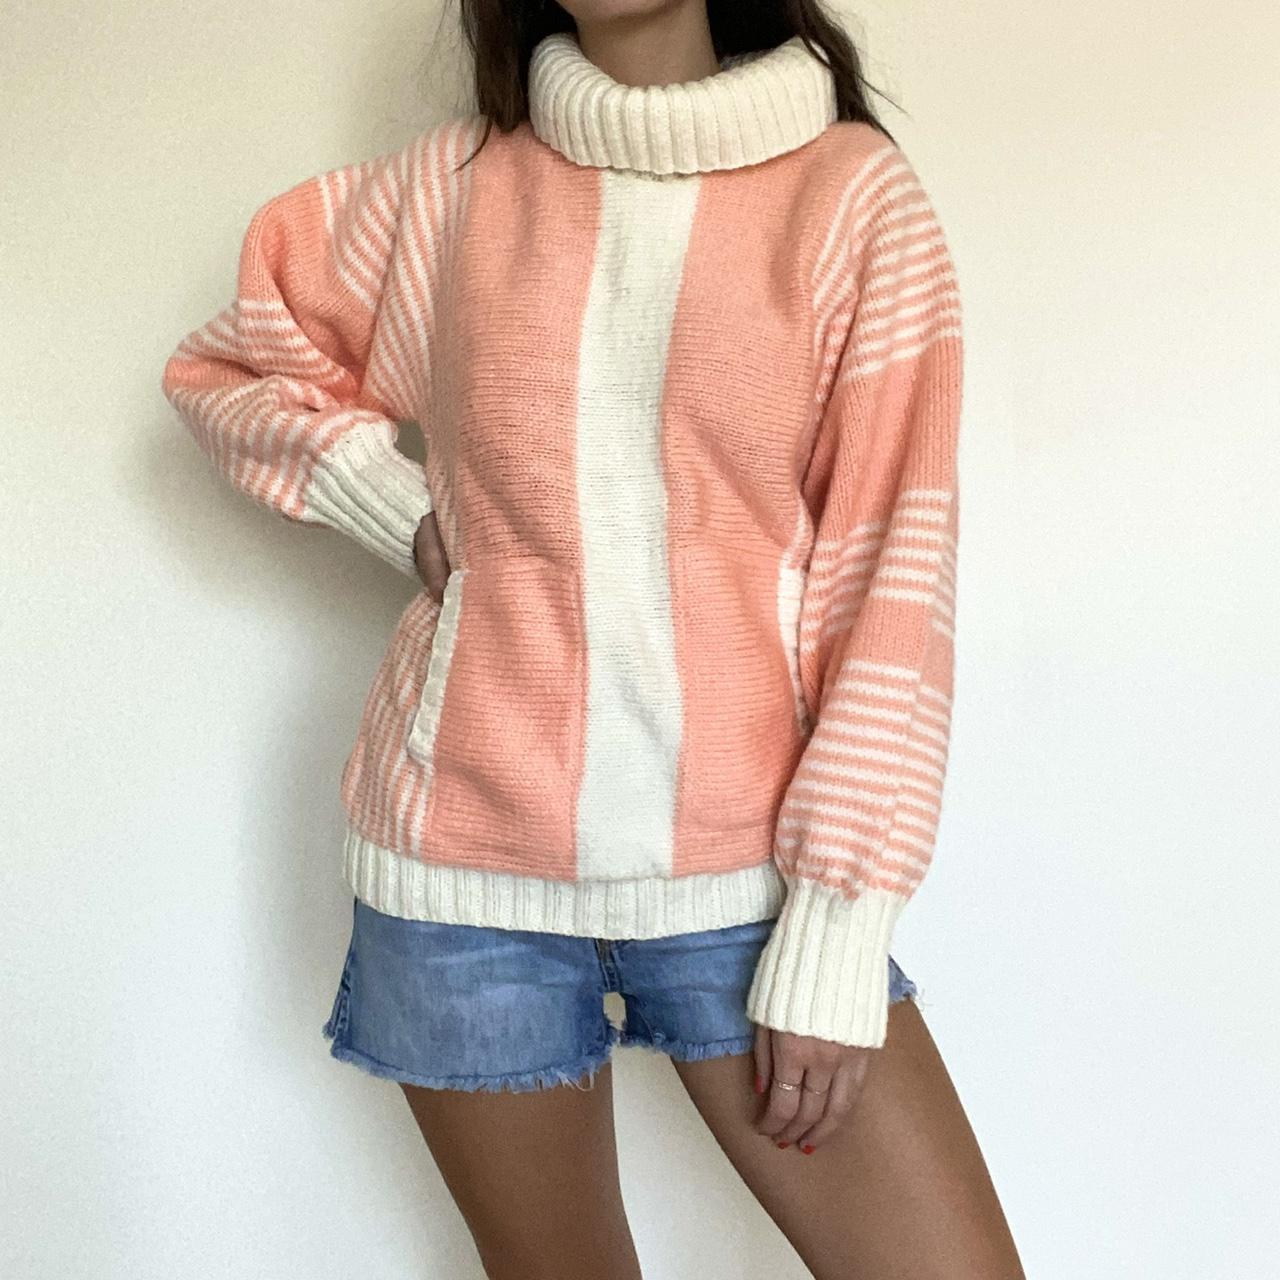 Product Image 1 - Beautiful hand knit peach and